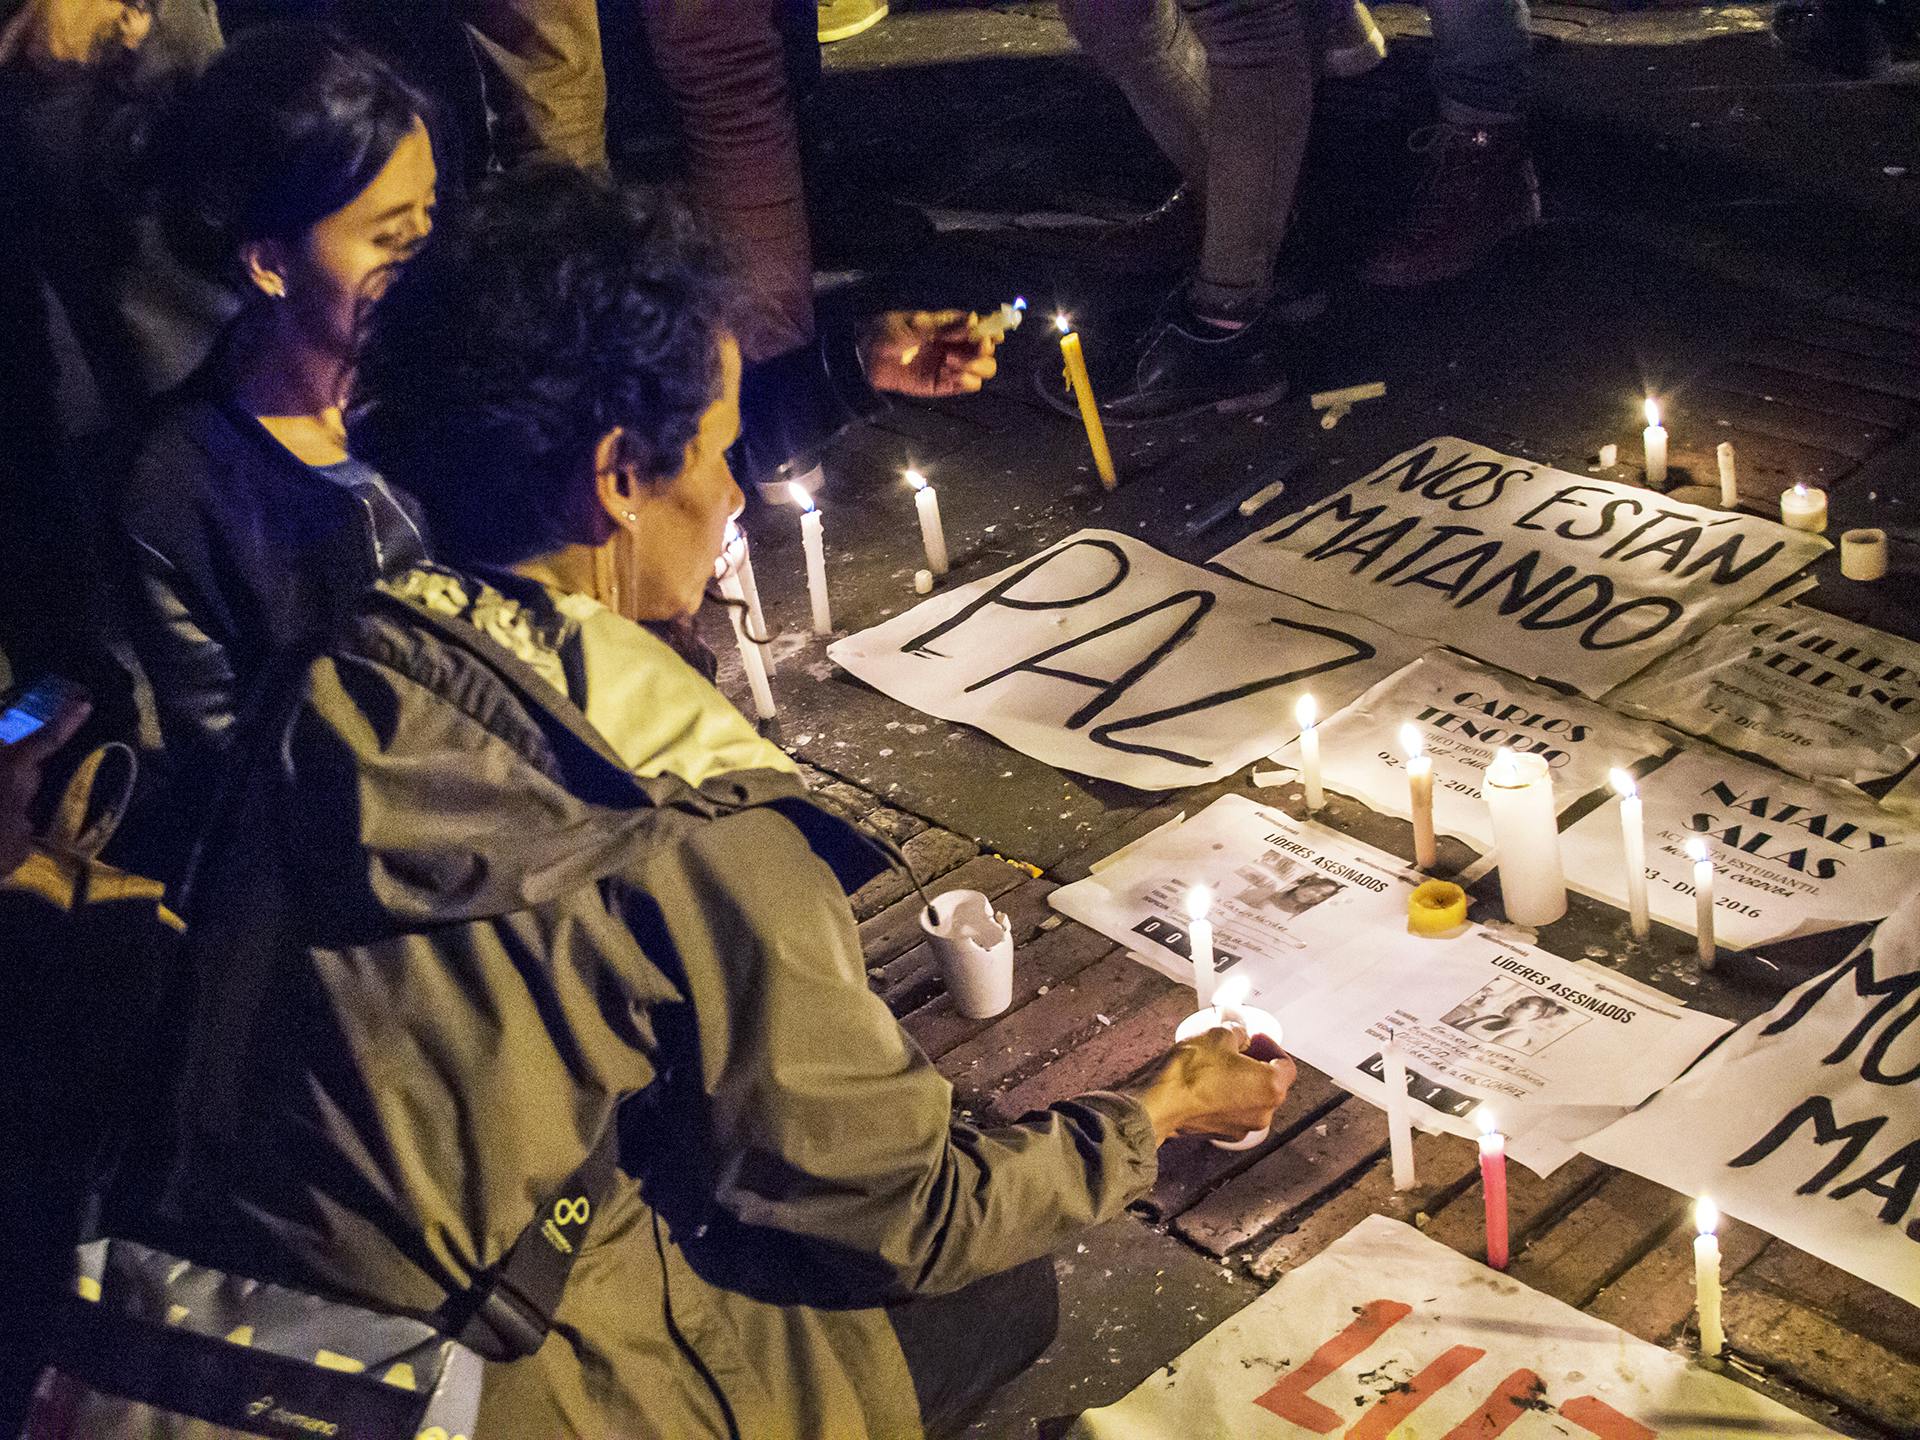 Two women lighting candles next to signs promoting peace.